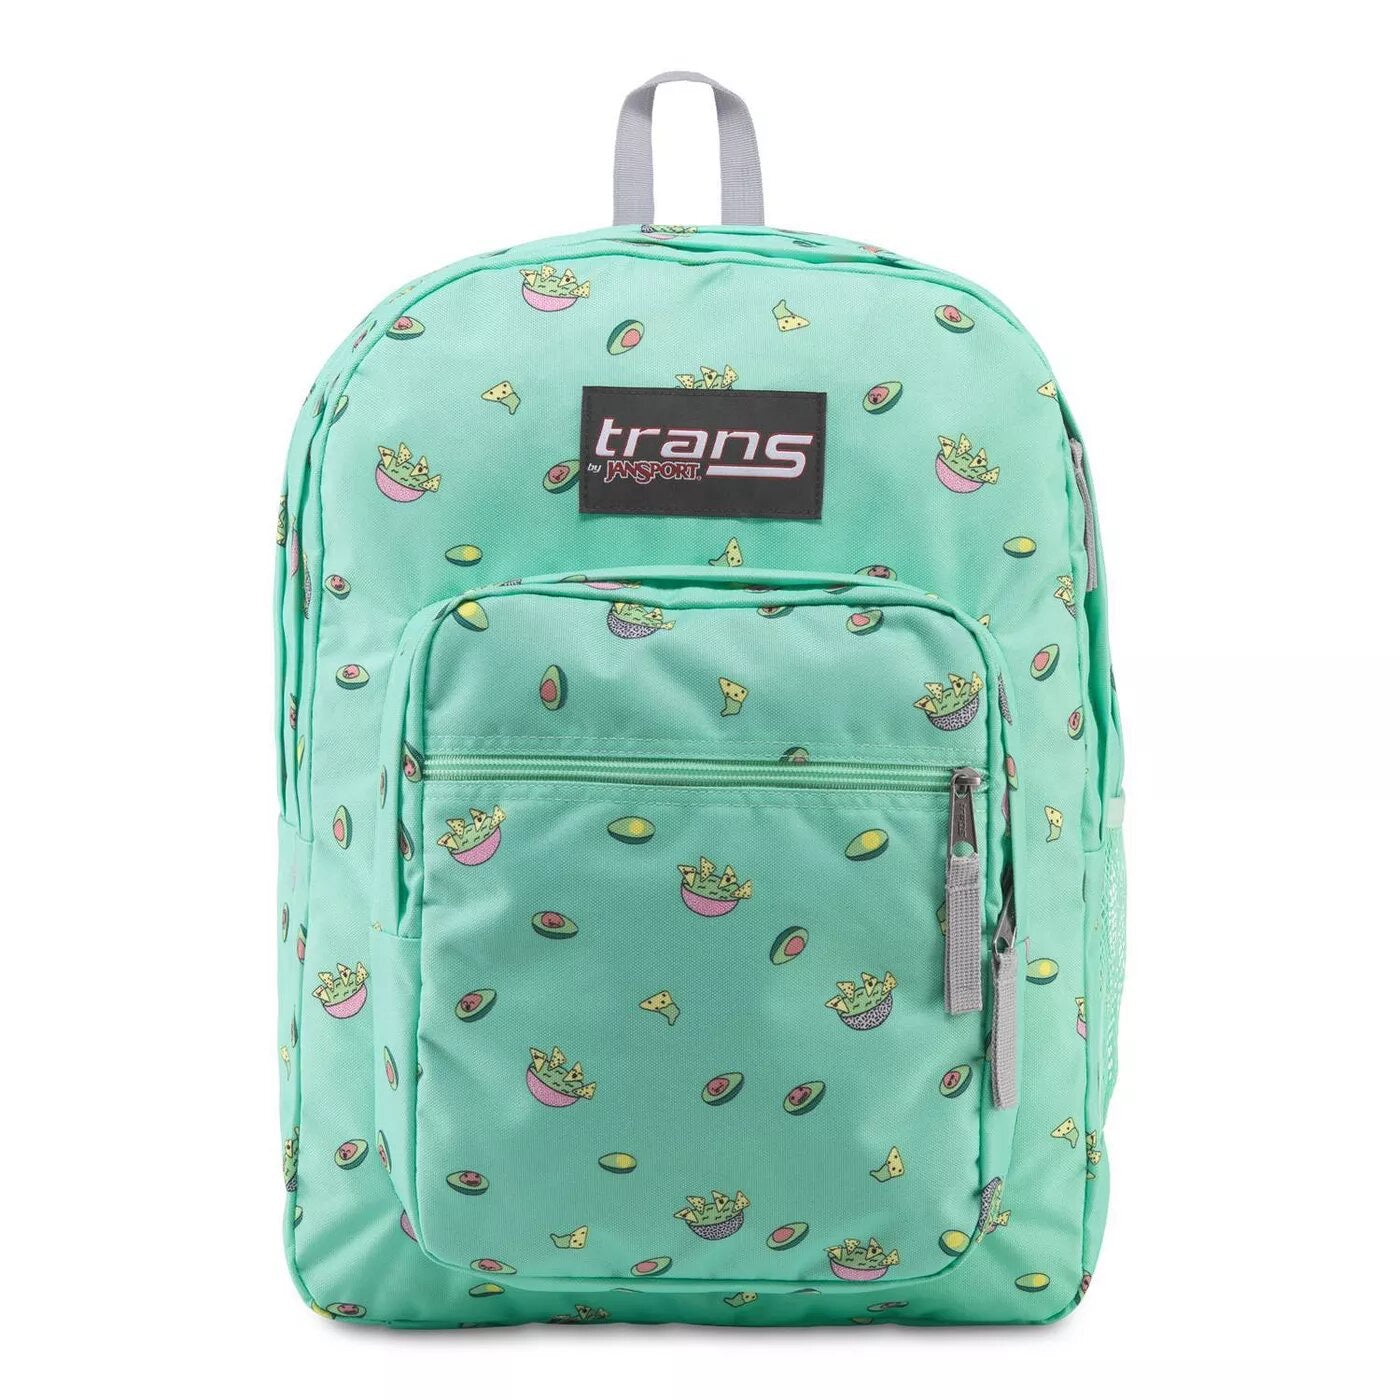 Trans by JanSport 17" Supermax Backpack - Avocado Party